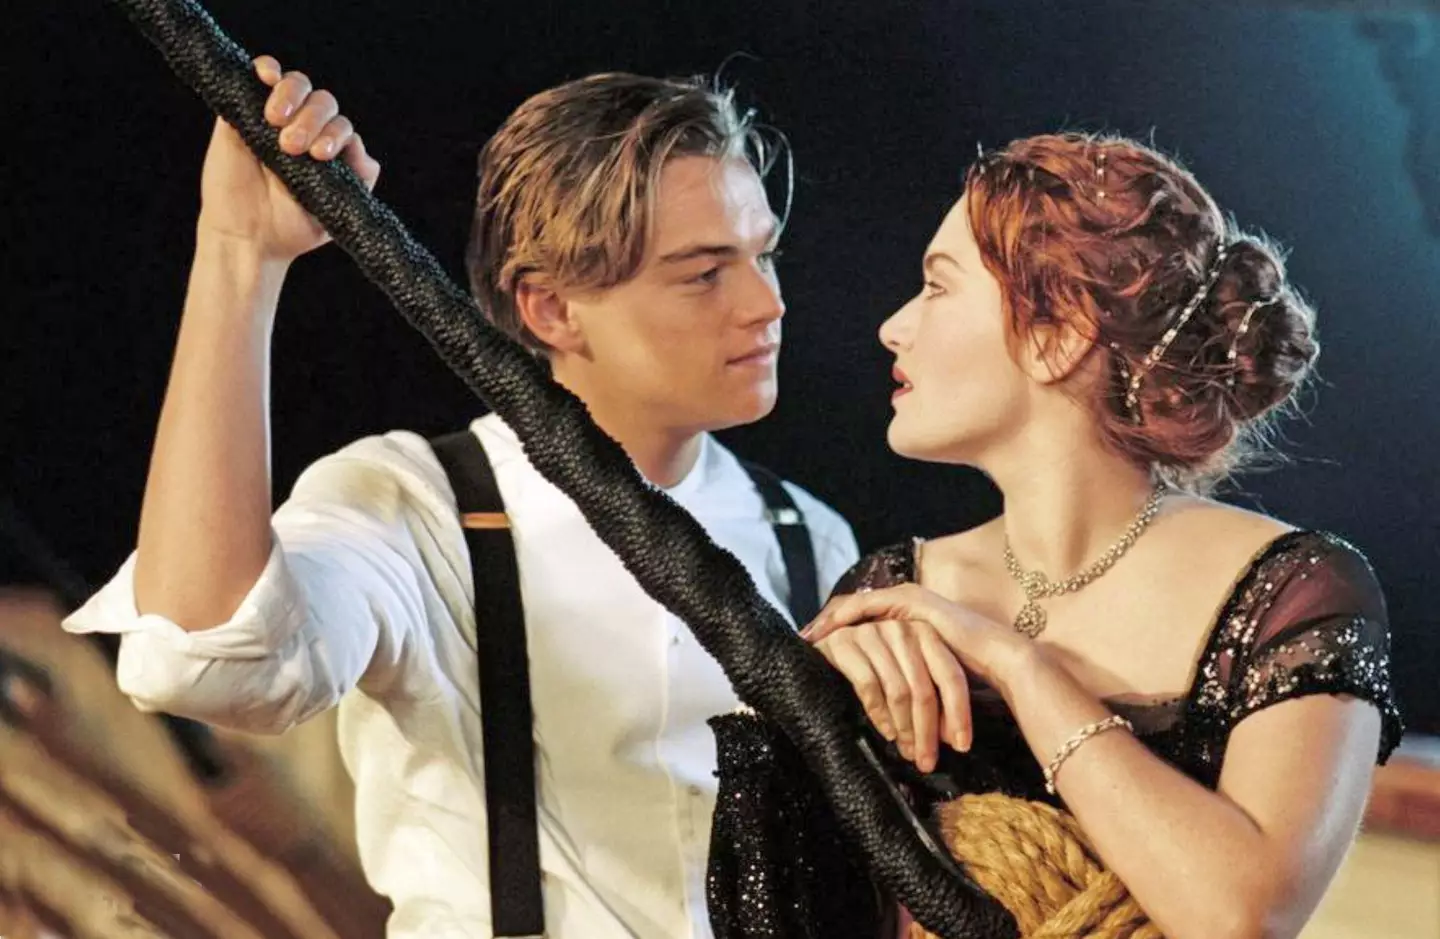 Leonardo DiCaprio wanted to play a porn star, but was busy filming Titanic instead.